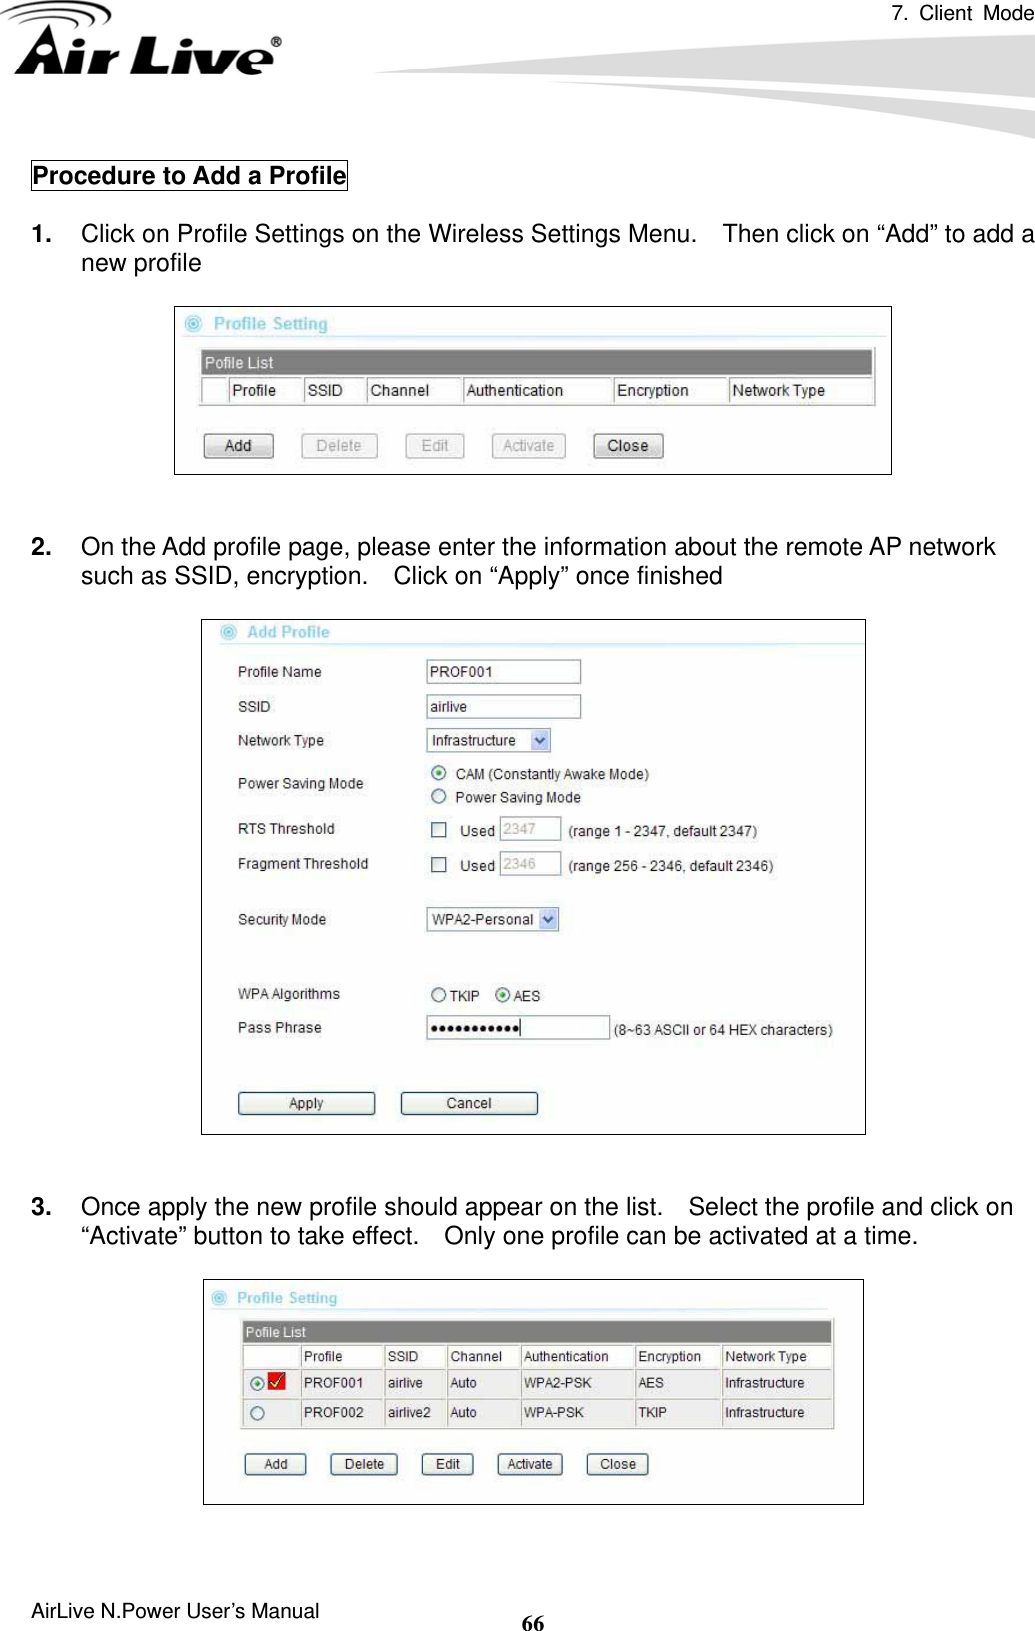 7. Client Mode  AirLive N.Power User’s Manual  66Procedure to Add a Profile  1.  Click on Profile Settings on the Wireless Settings Menu.    Then click on “Add” to add a new profile     2.  On the Add profile page, please enter the information about the remote AP network such as SSID, encryption.    Click on “Apply” once finished     3.  Once apply the new profile should appear on the list.    Select the profile and click on “Activate” button to take effect.    Only one profile can be activated at a time.     